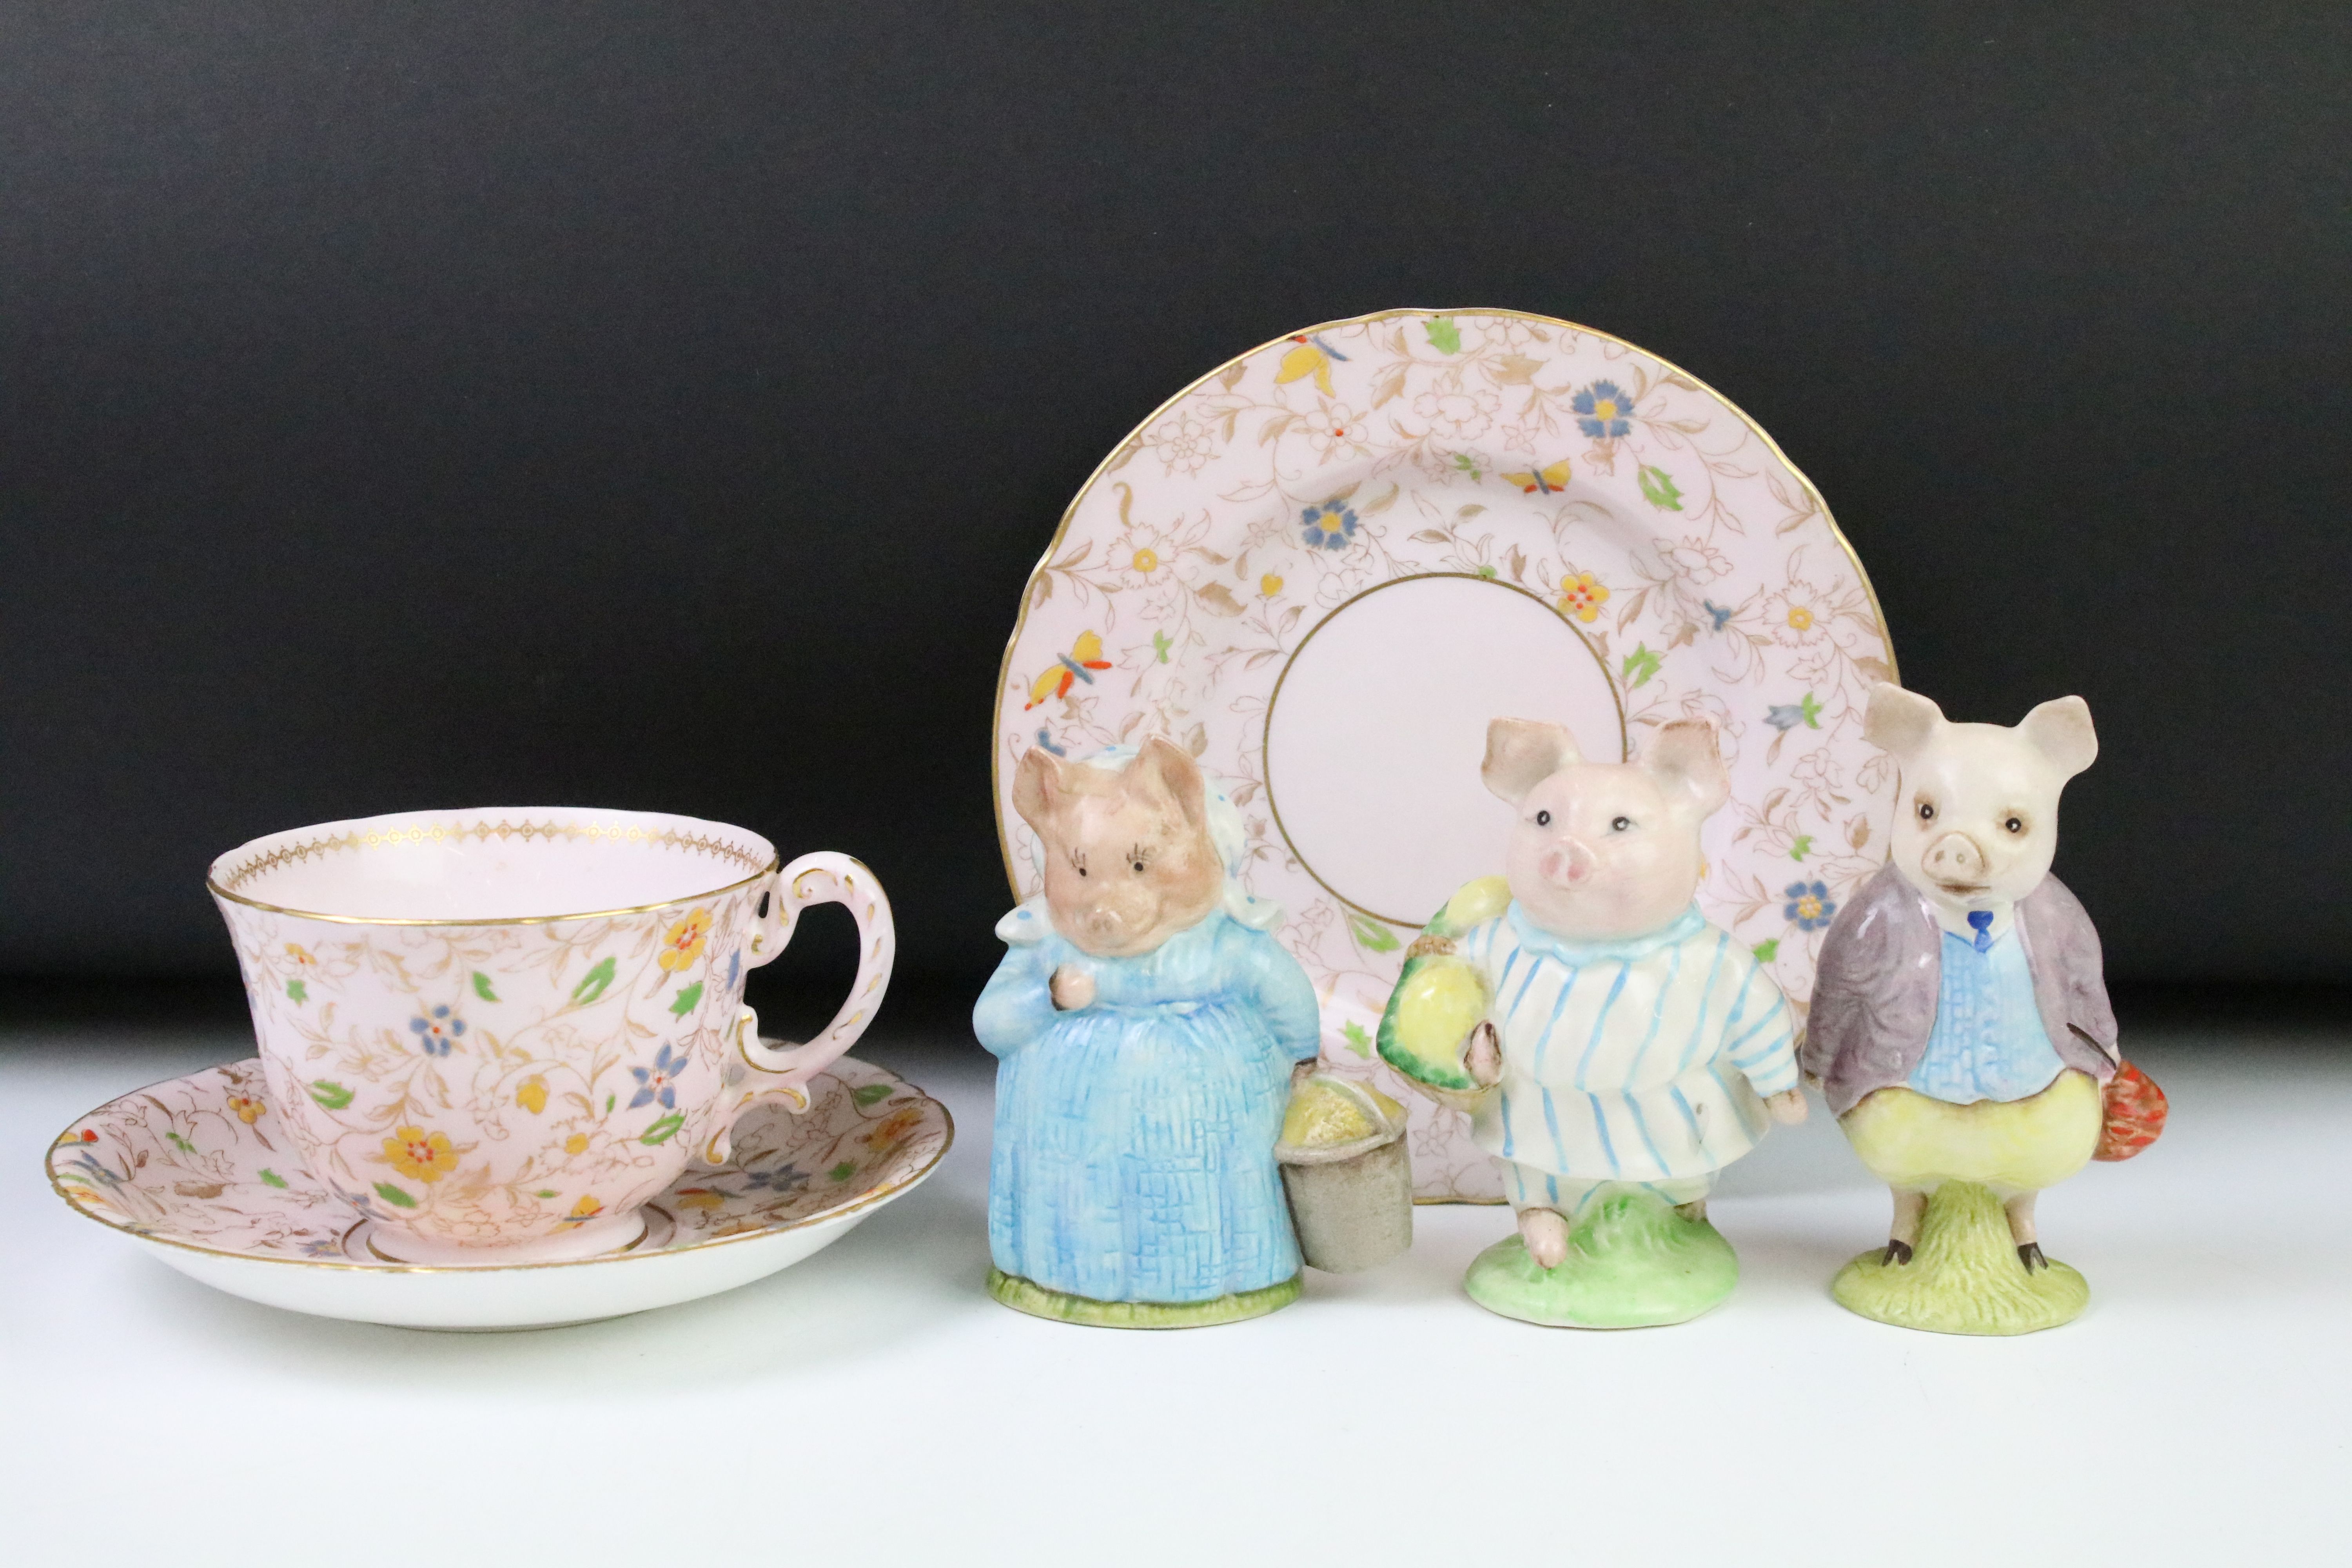 Three Beatrix Potter porcelain figures to include 2 x Beswick (Pigling Bland & Little Pig